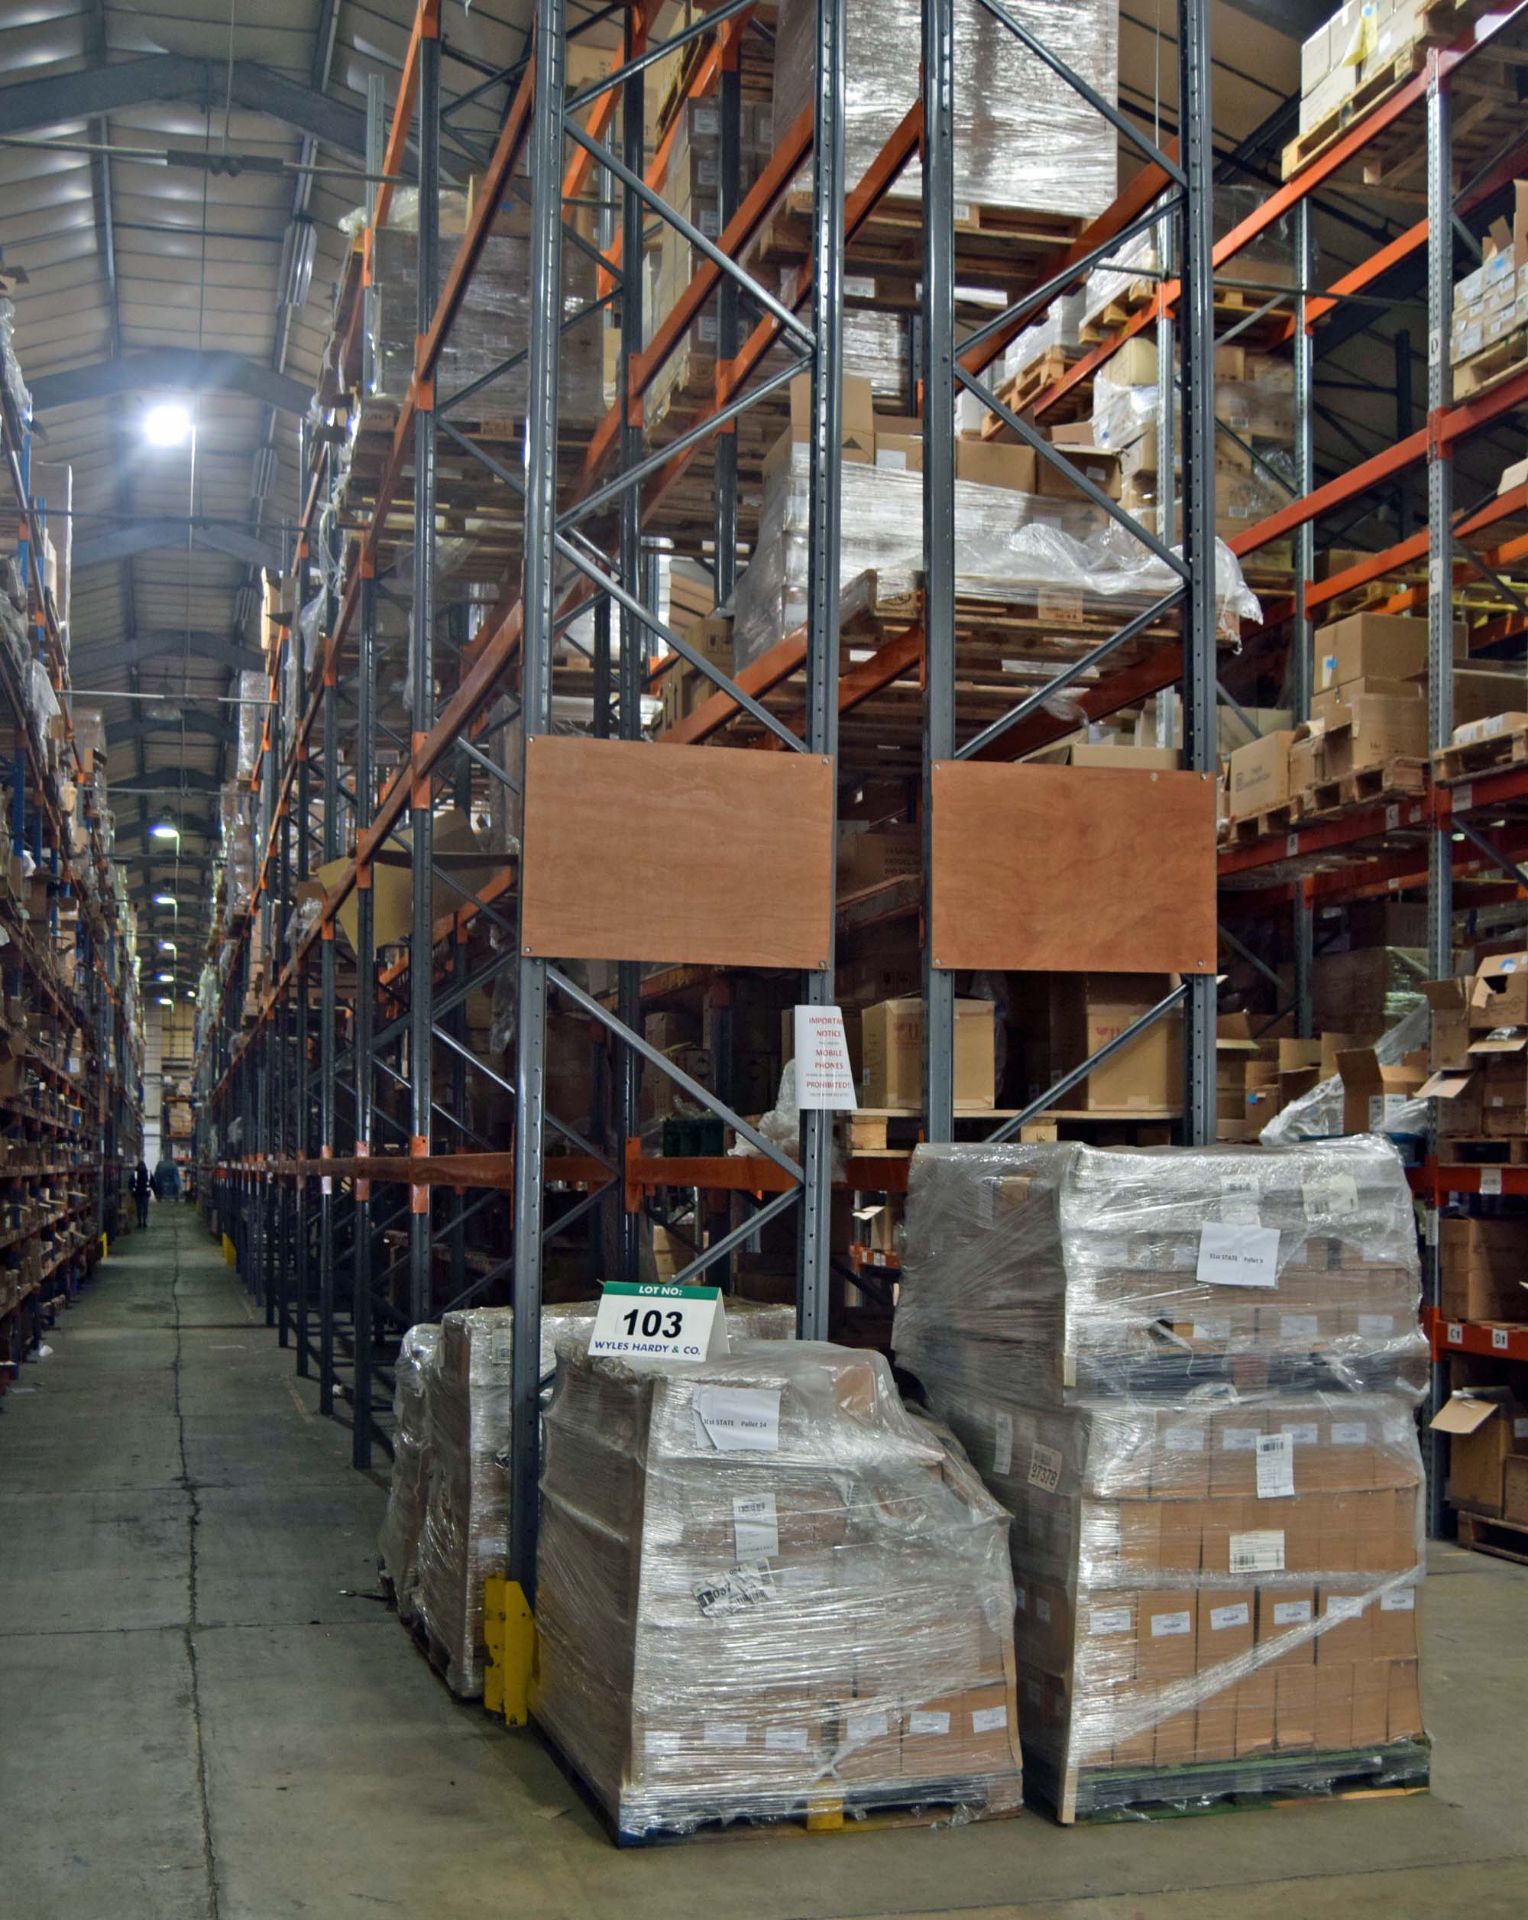 The Warehousing 4-Tier Pallet Racking providing Approx. 1750 Pallet Positions (Standard Pallets) (